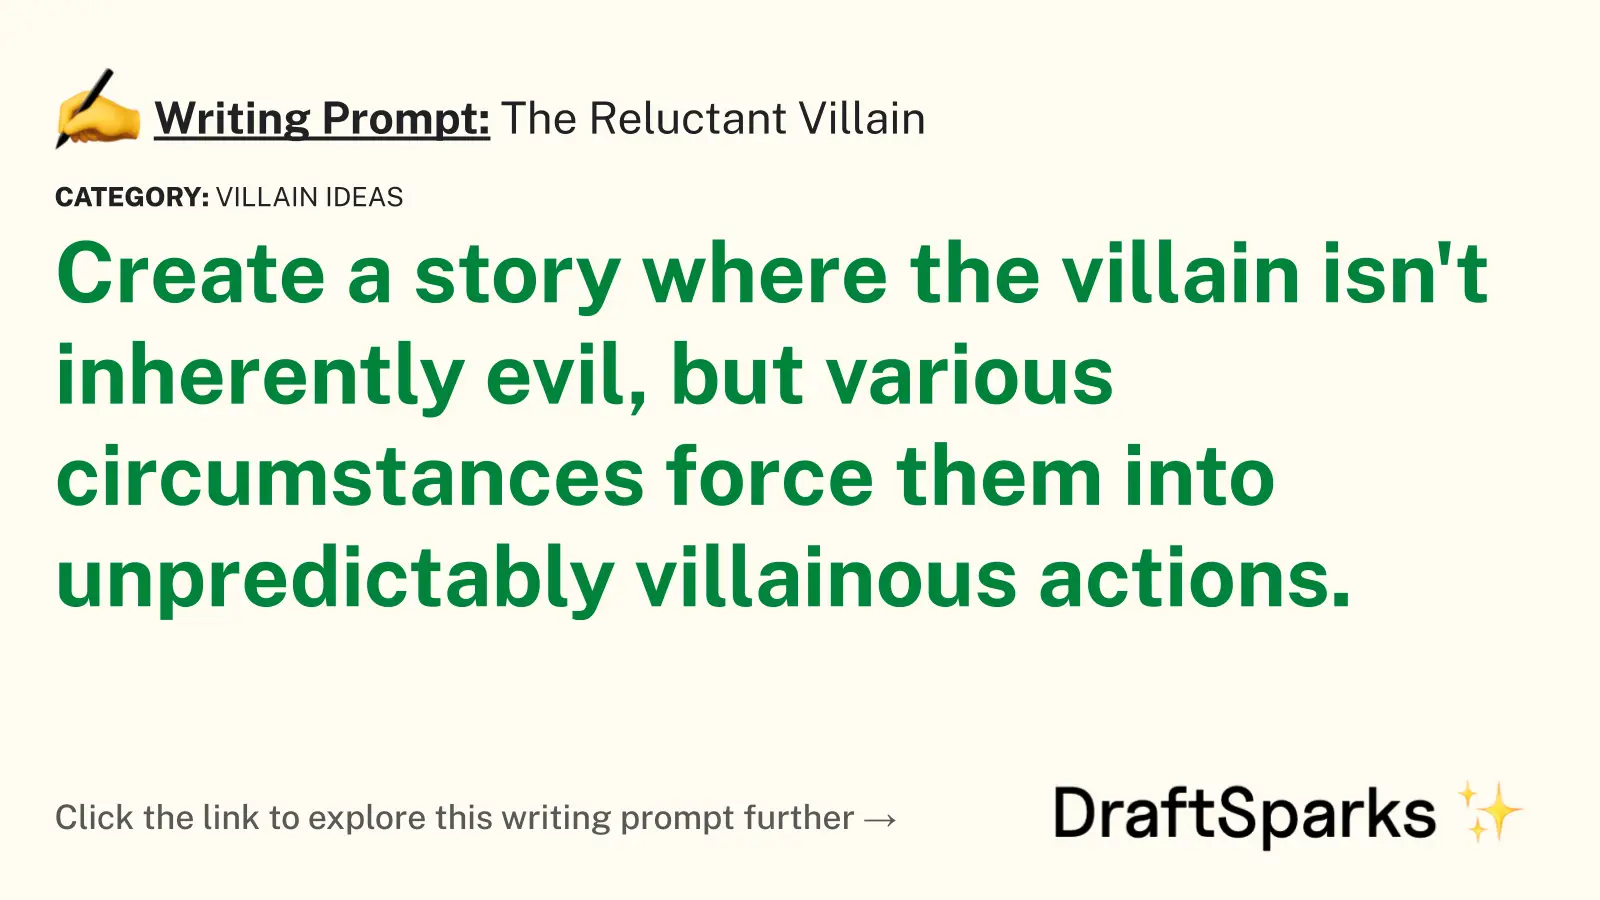 The Reluctant Villain